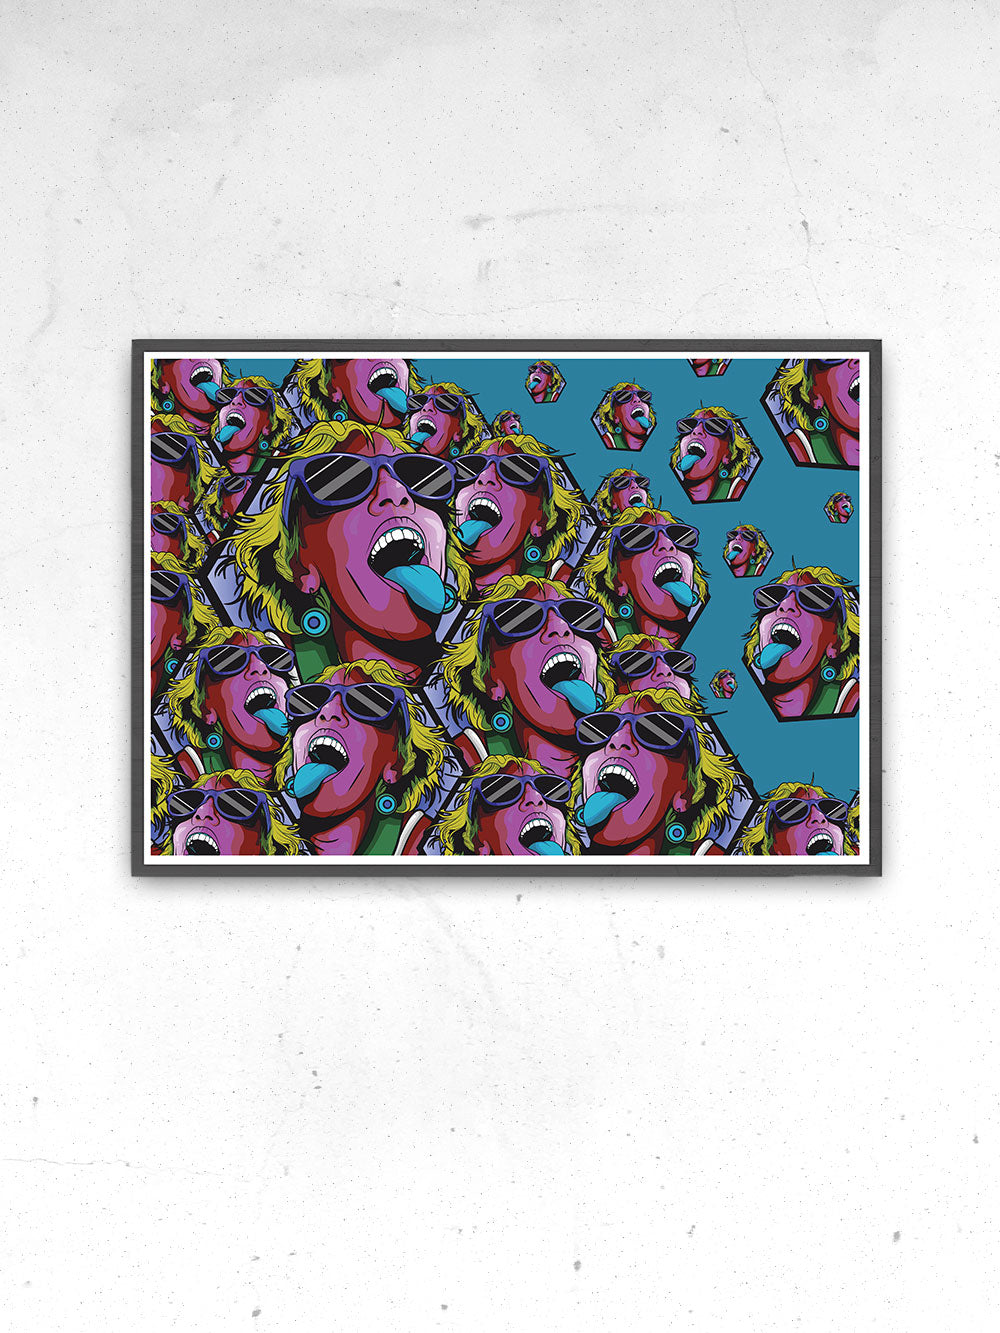 Rave Girl Blue Vector Illustration Print in a frame on a wall